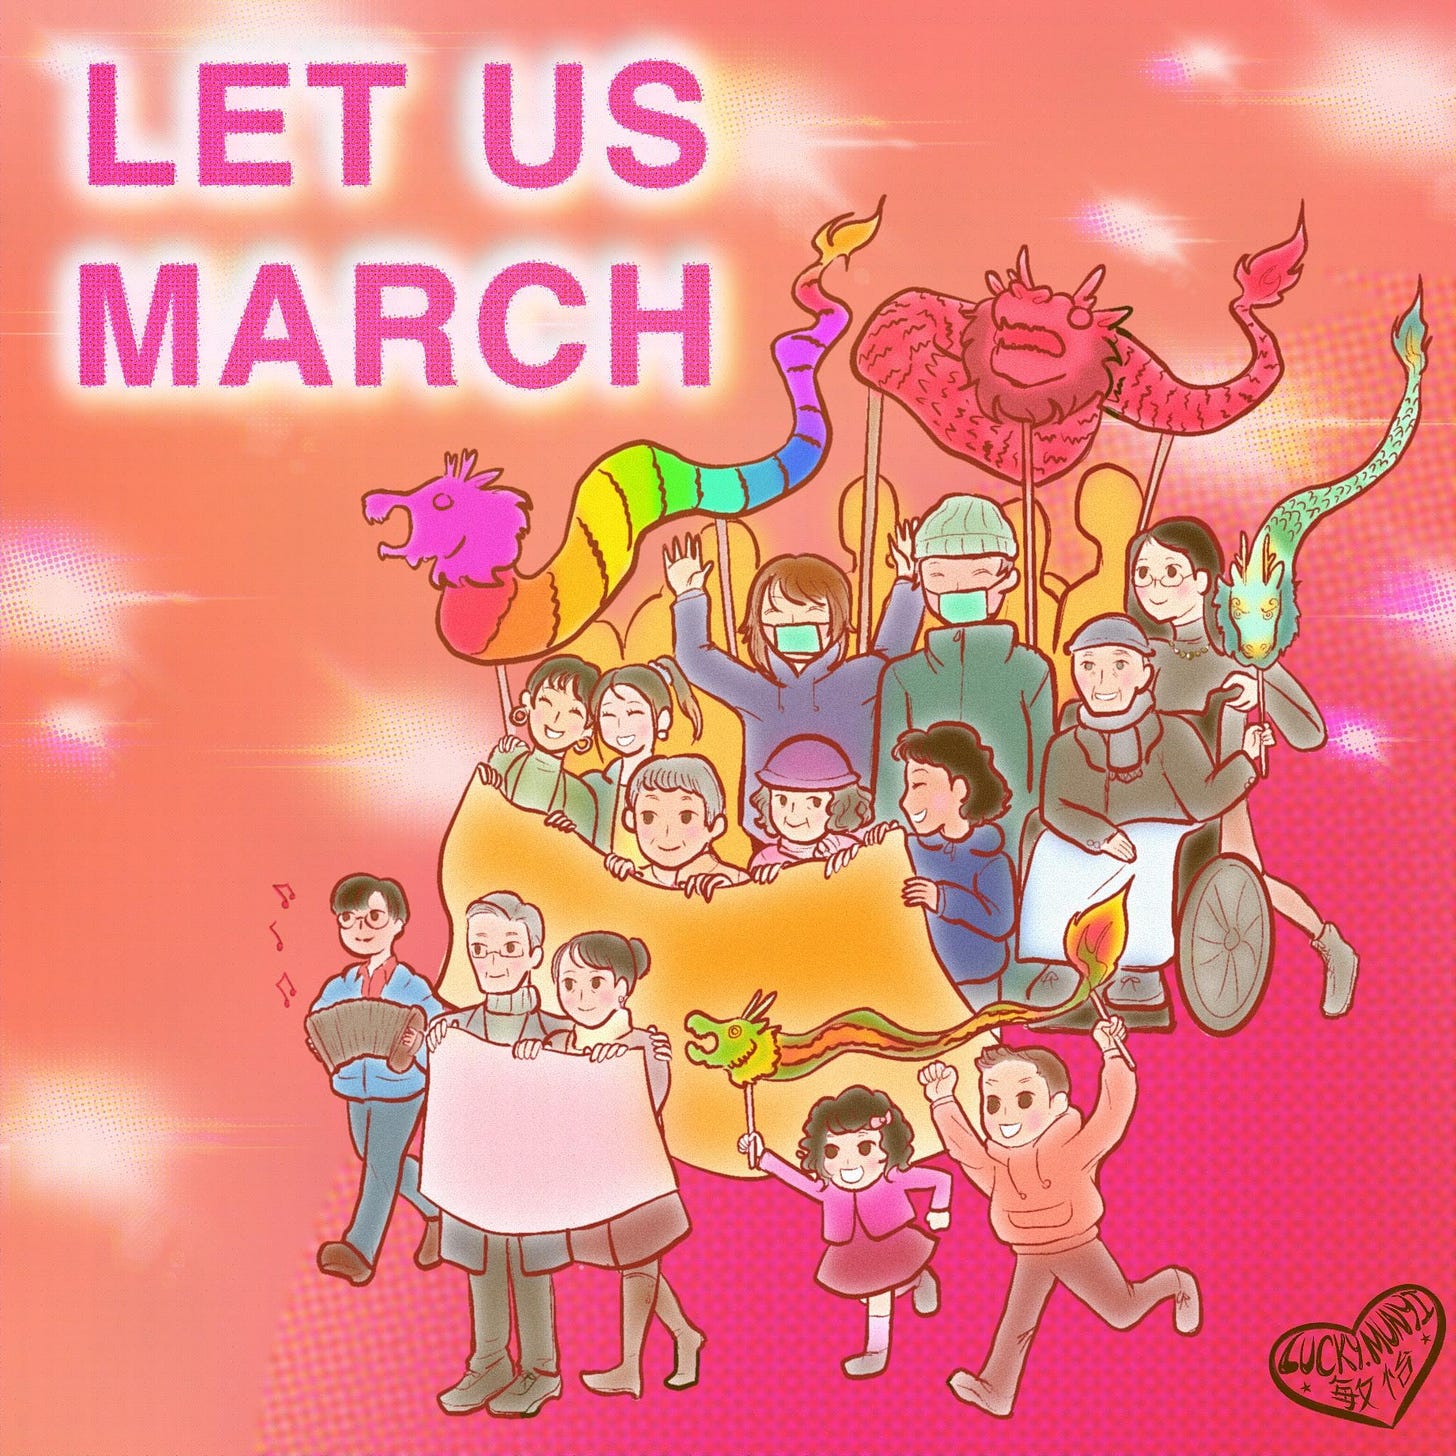 Let us march